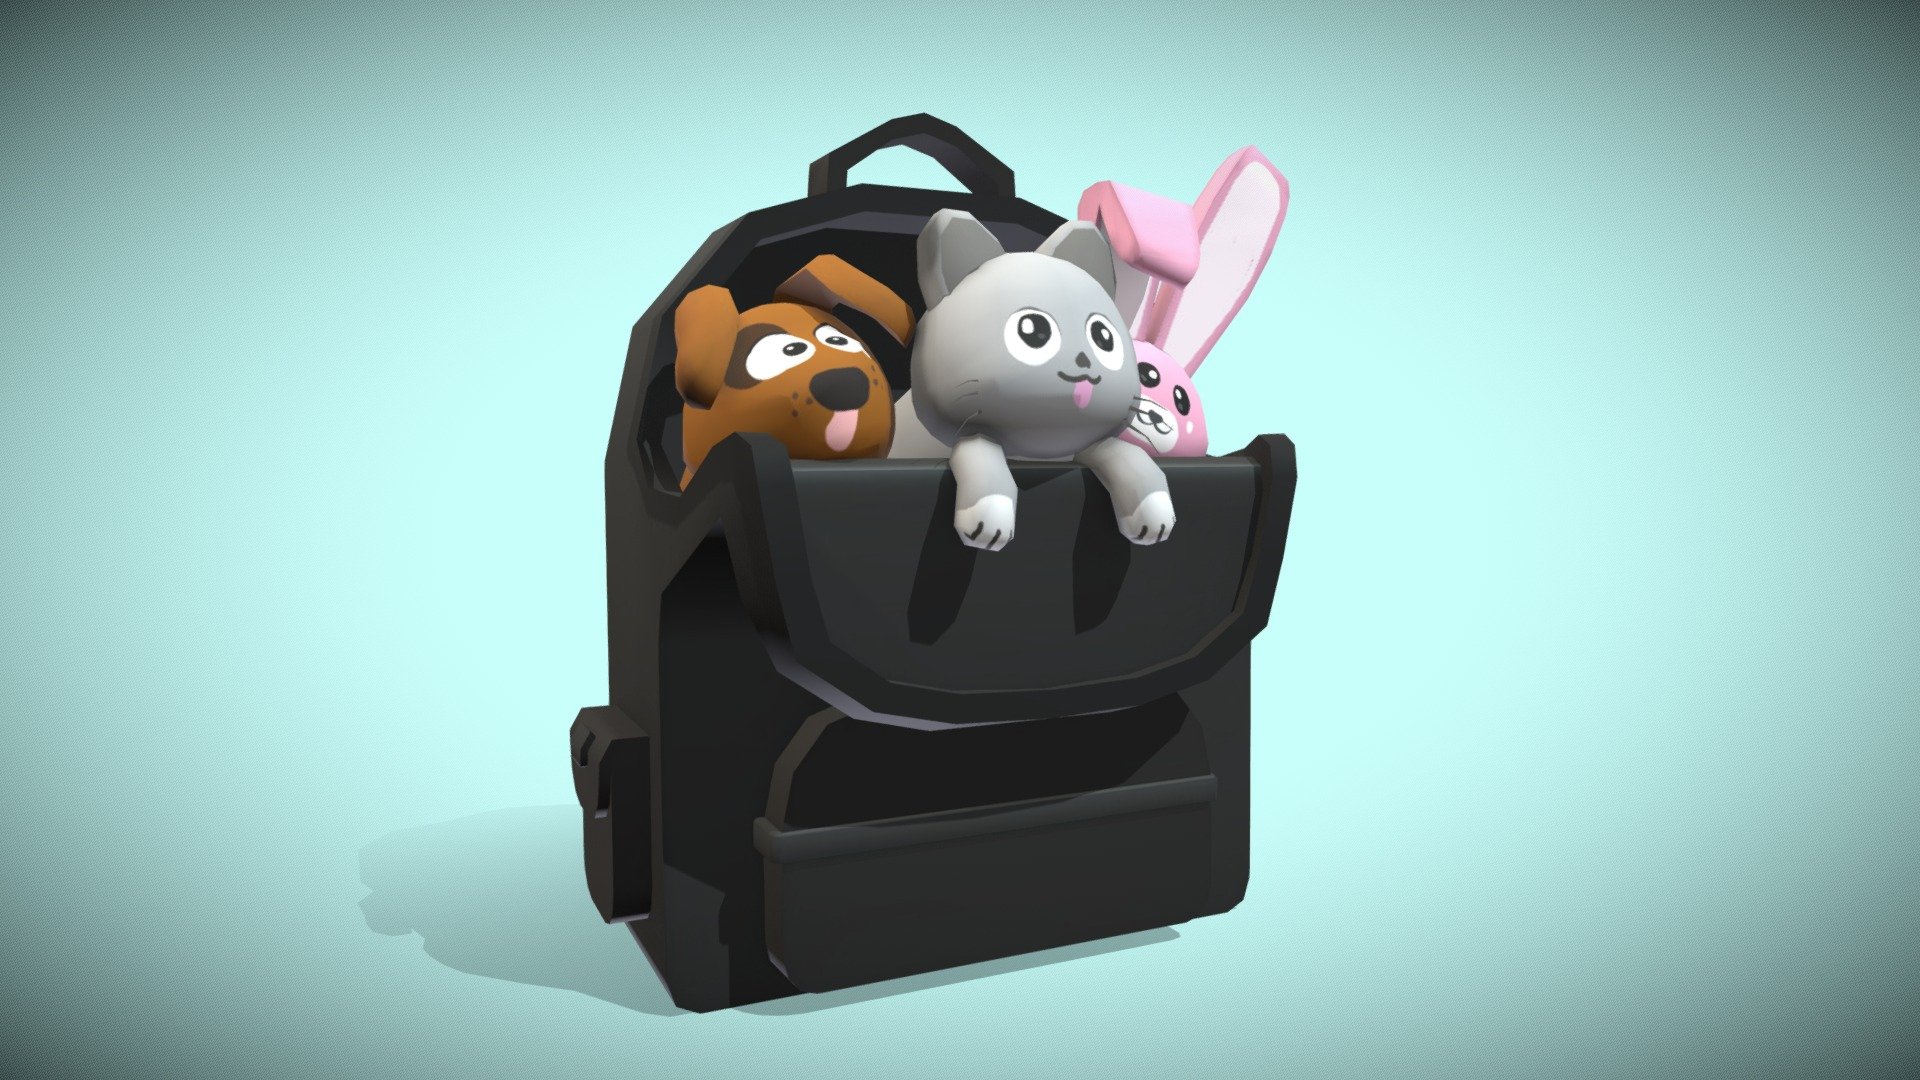 Black and grey cartoon style low poly backpack. Modeled in Blender textured in Substance Painter 3D - Black Pet Backpack Roblox/UGC - 3D model by Sonsss 3d model